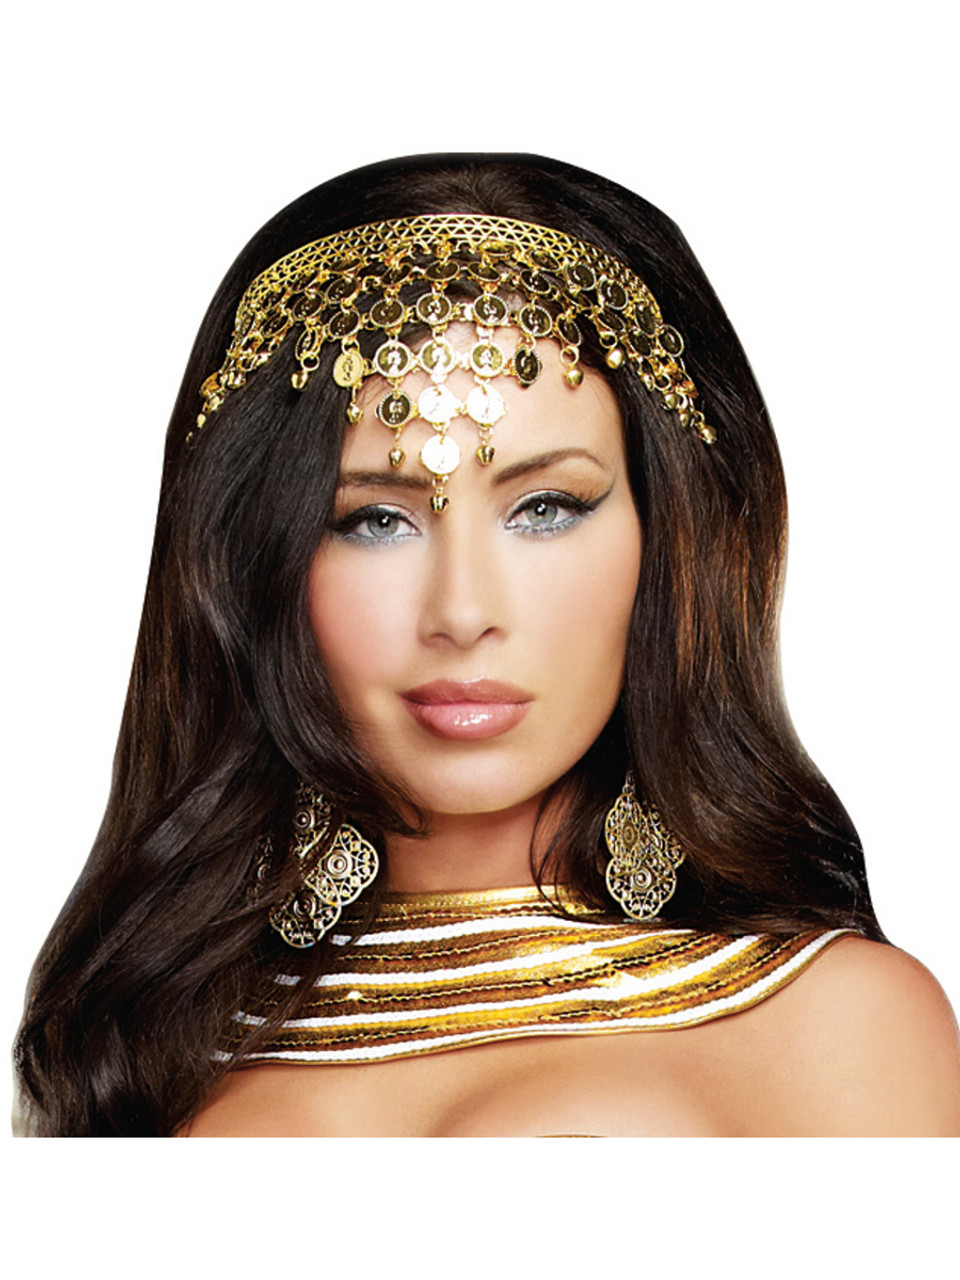 Dazzling Gold Coin Women's Royalty Headpiece